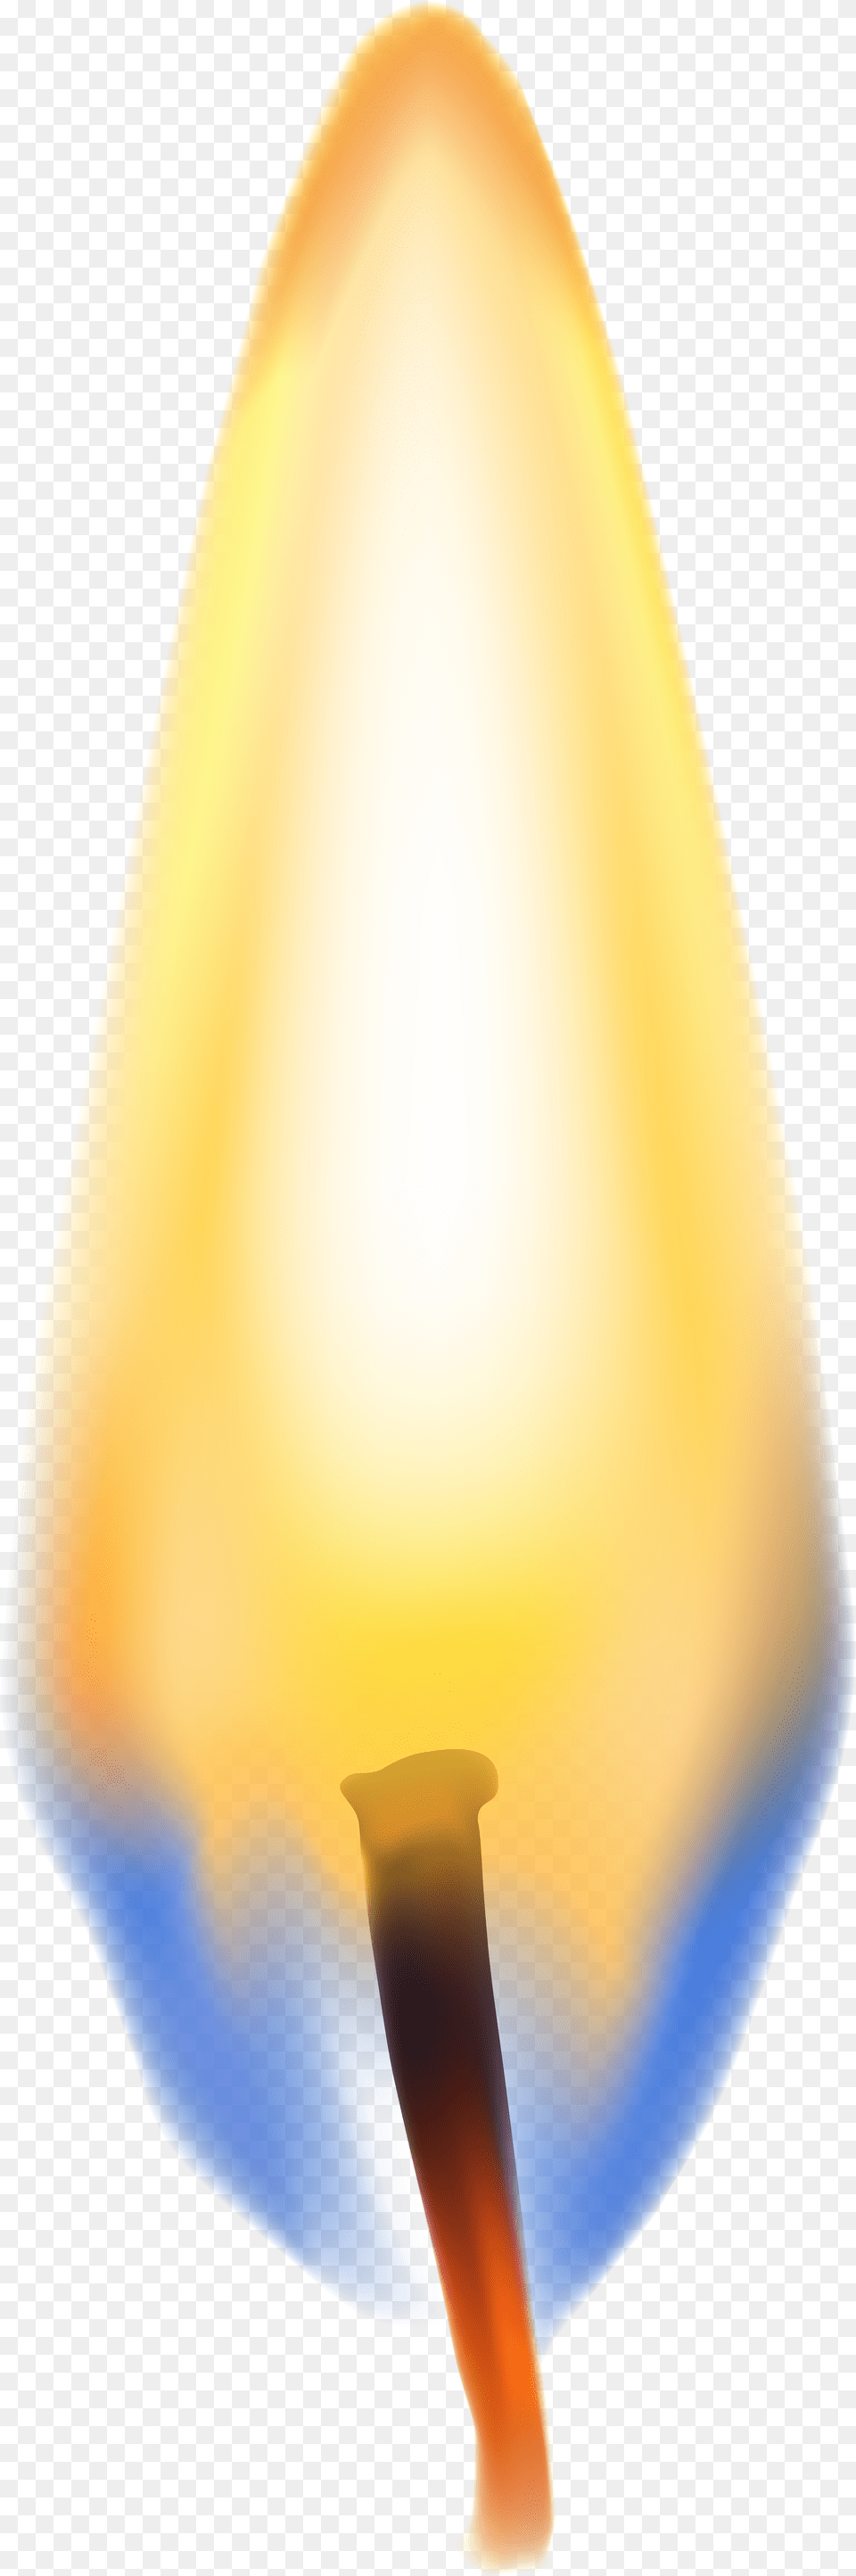 Candle Flame Free Png